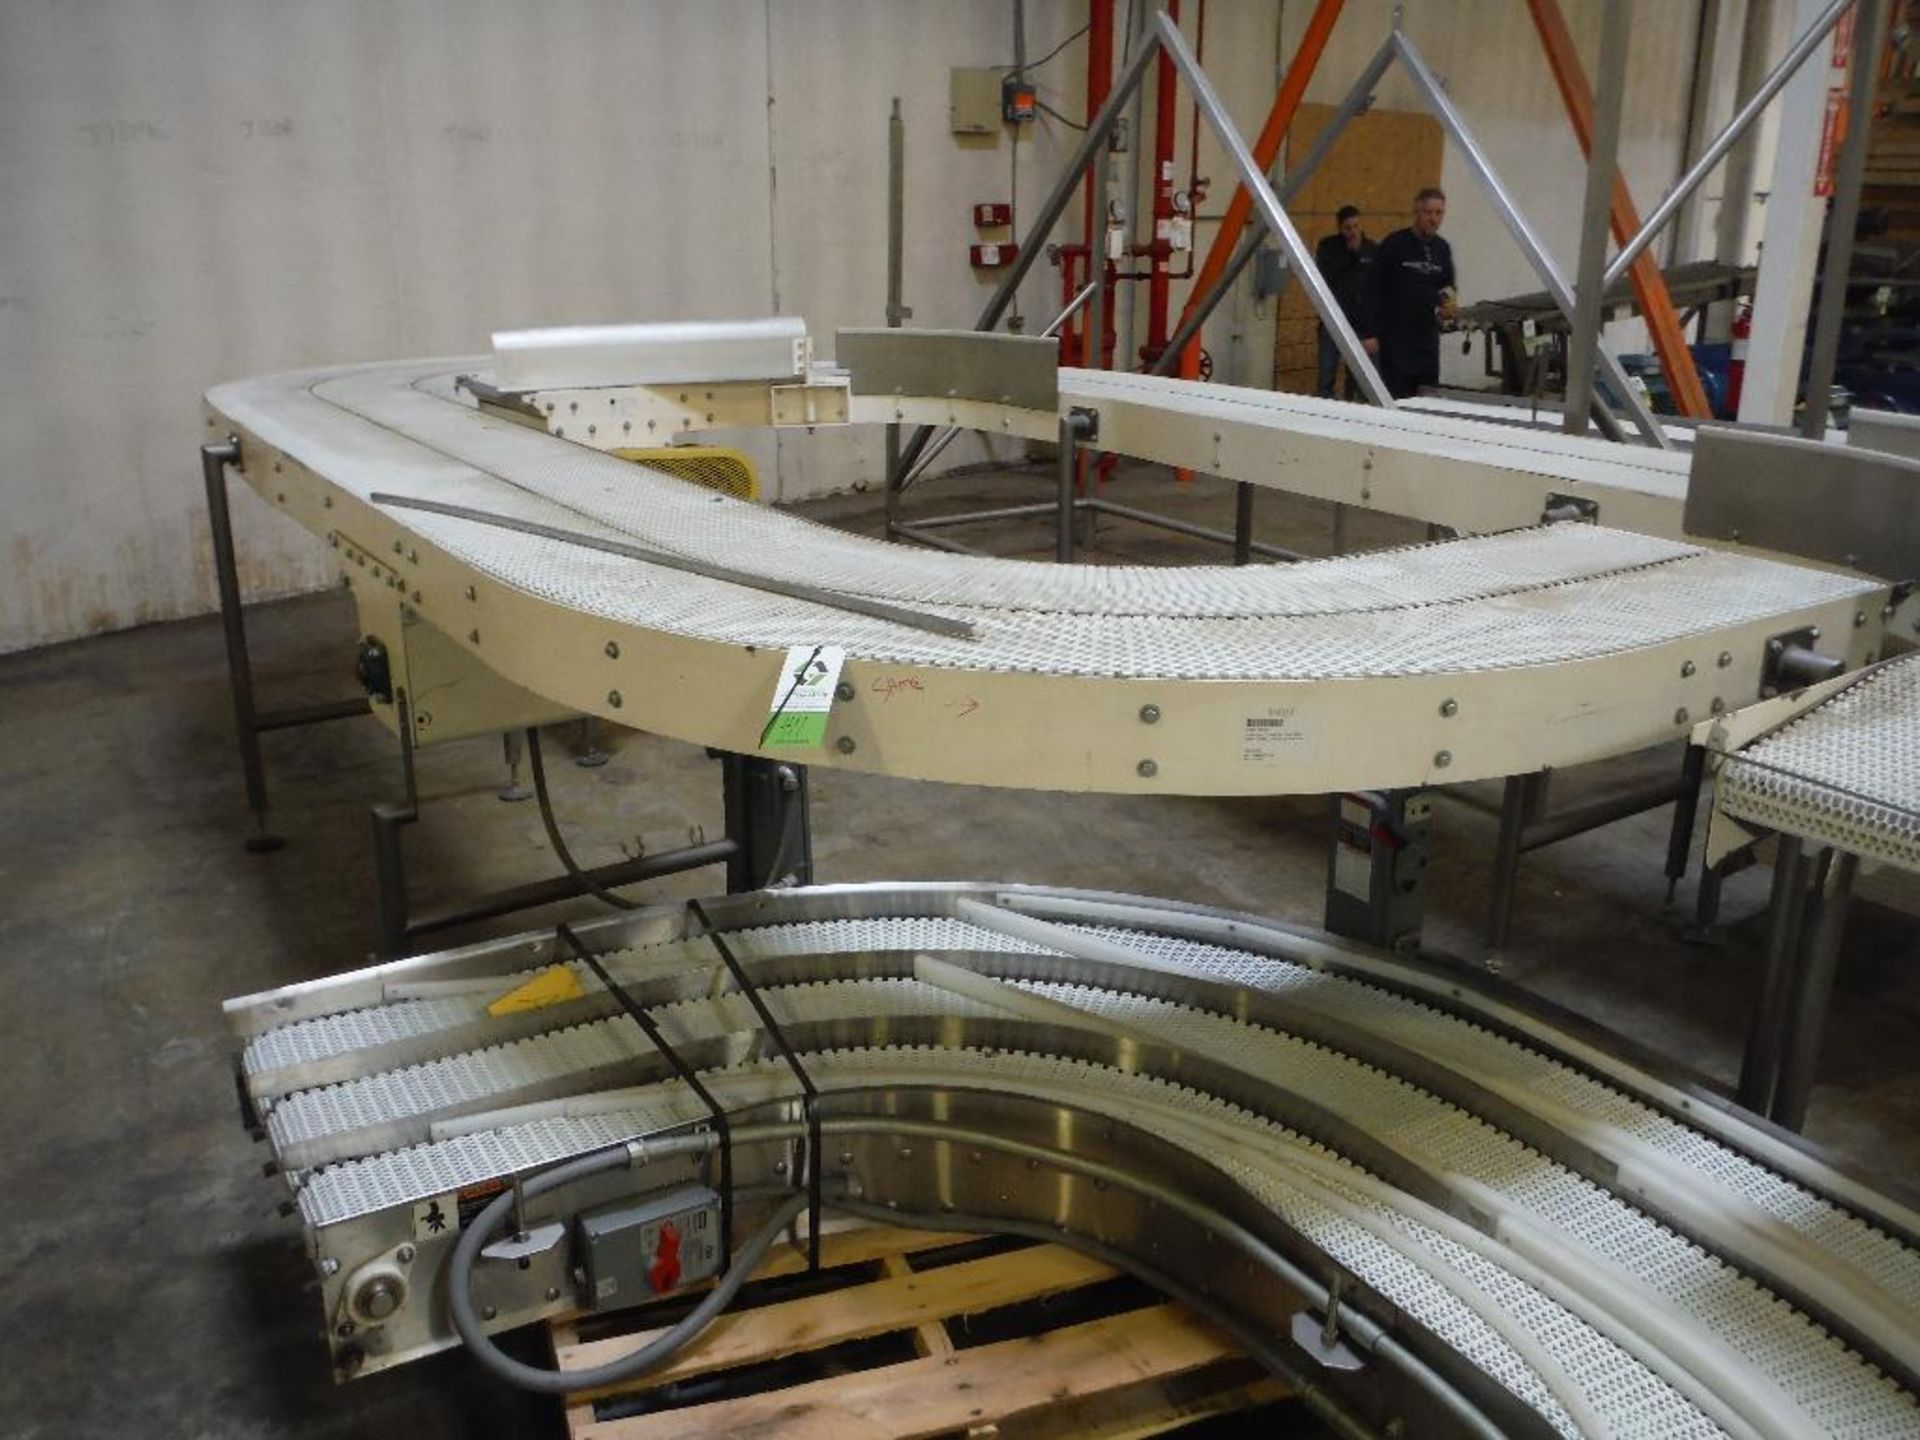 180 degree dual lane conveyor, 11.5 in. wide each, overall 192 in. long x 46 in. tall, carbon steel